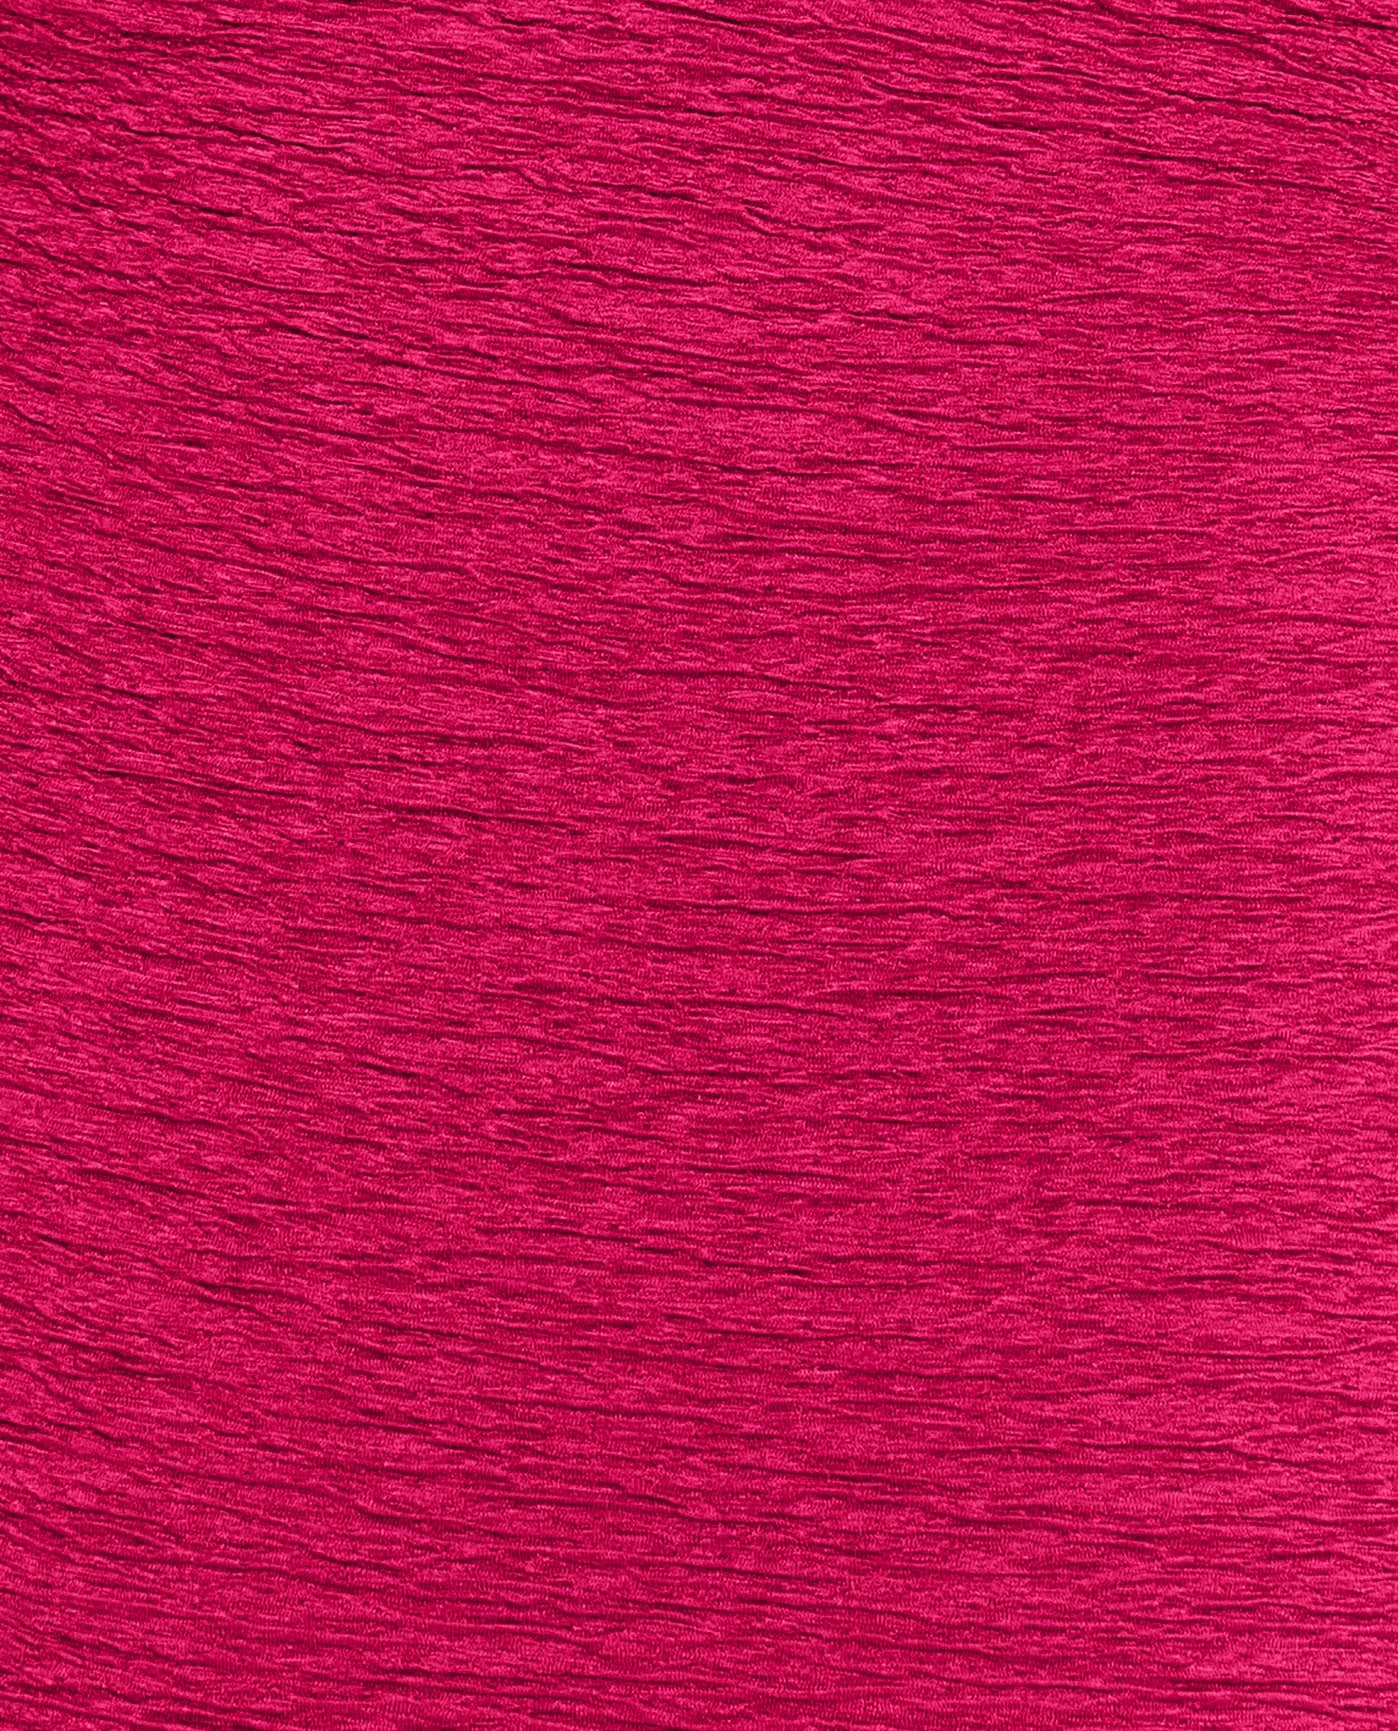 FABRIC SWATCH VIEW OF CHLORINE RESISTANT KRINKLE TEXTURED SOLID TWIST FRONT ONE PIECE | KRINKLE BERRY